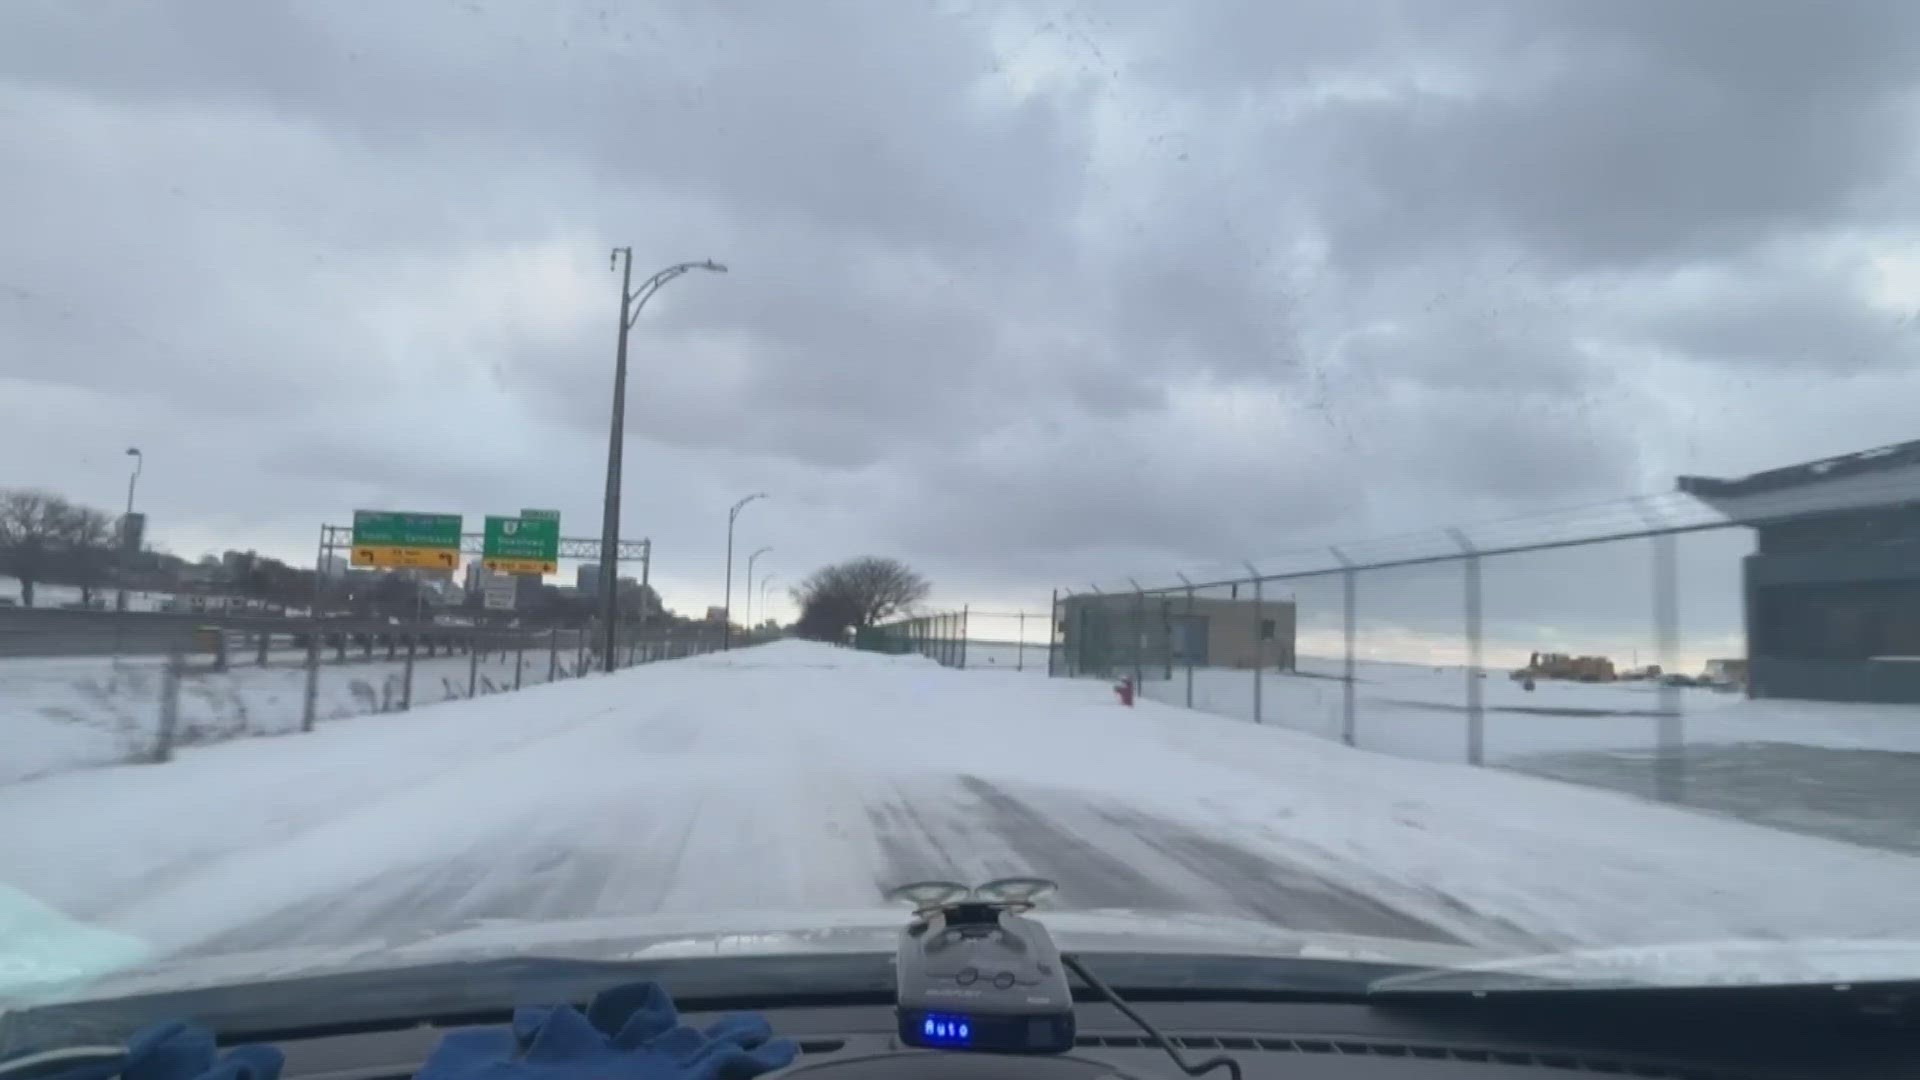 3News has a live look at the road conditions on North Marginal Road in Cleveland following Friday's winter storm.